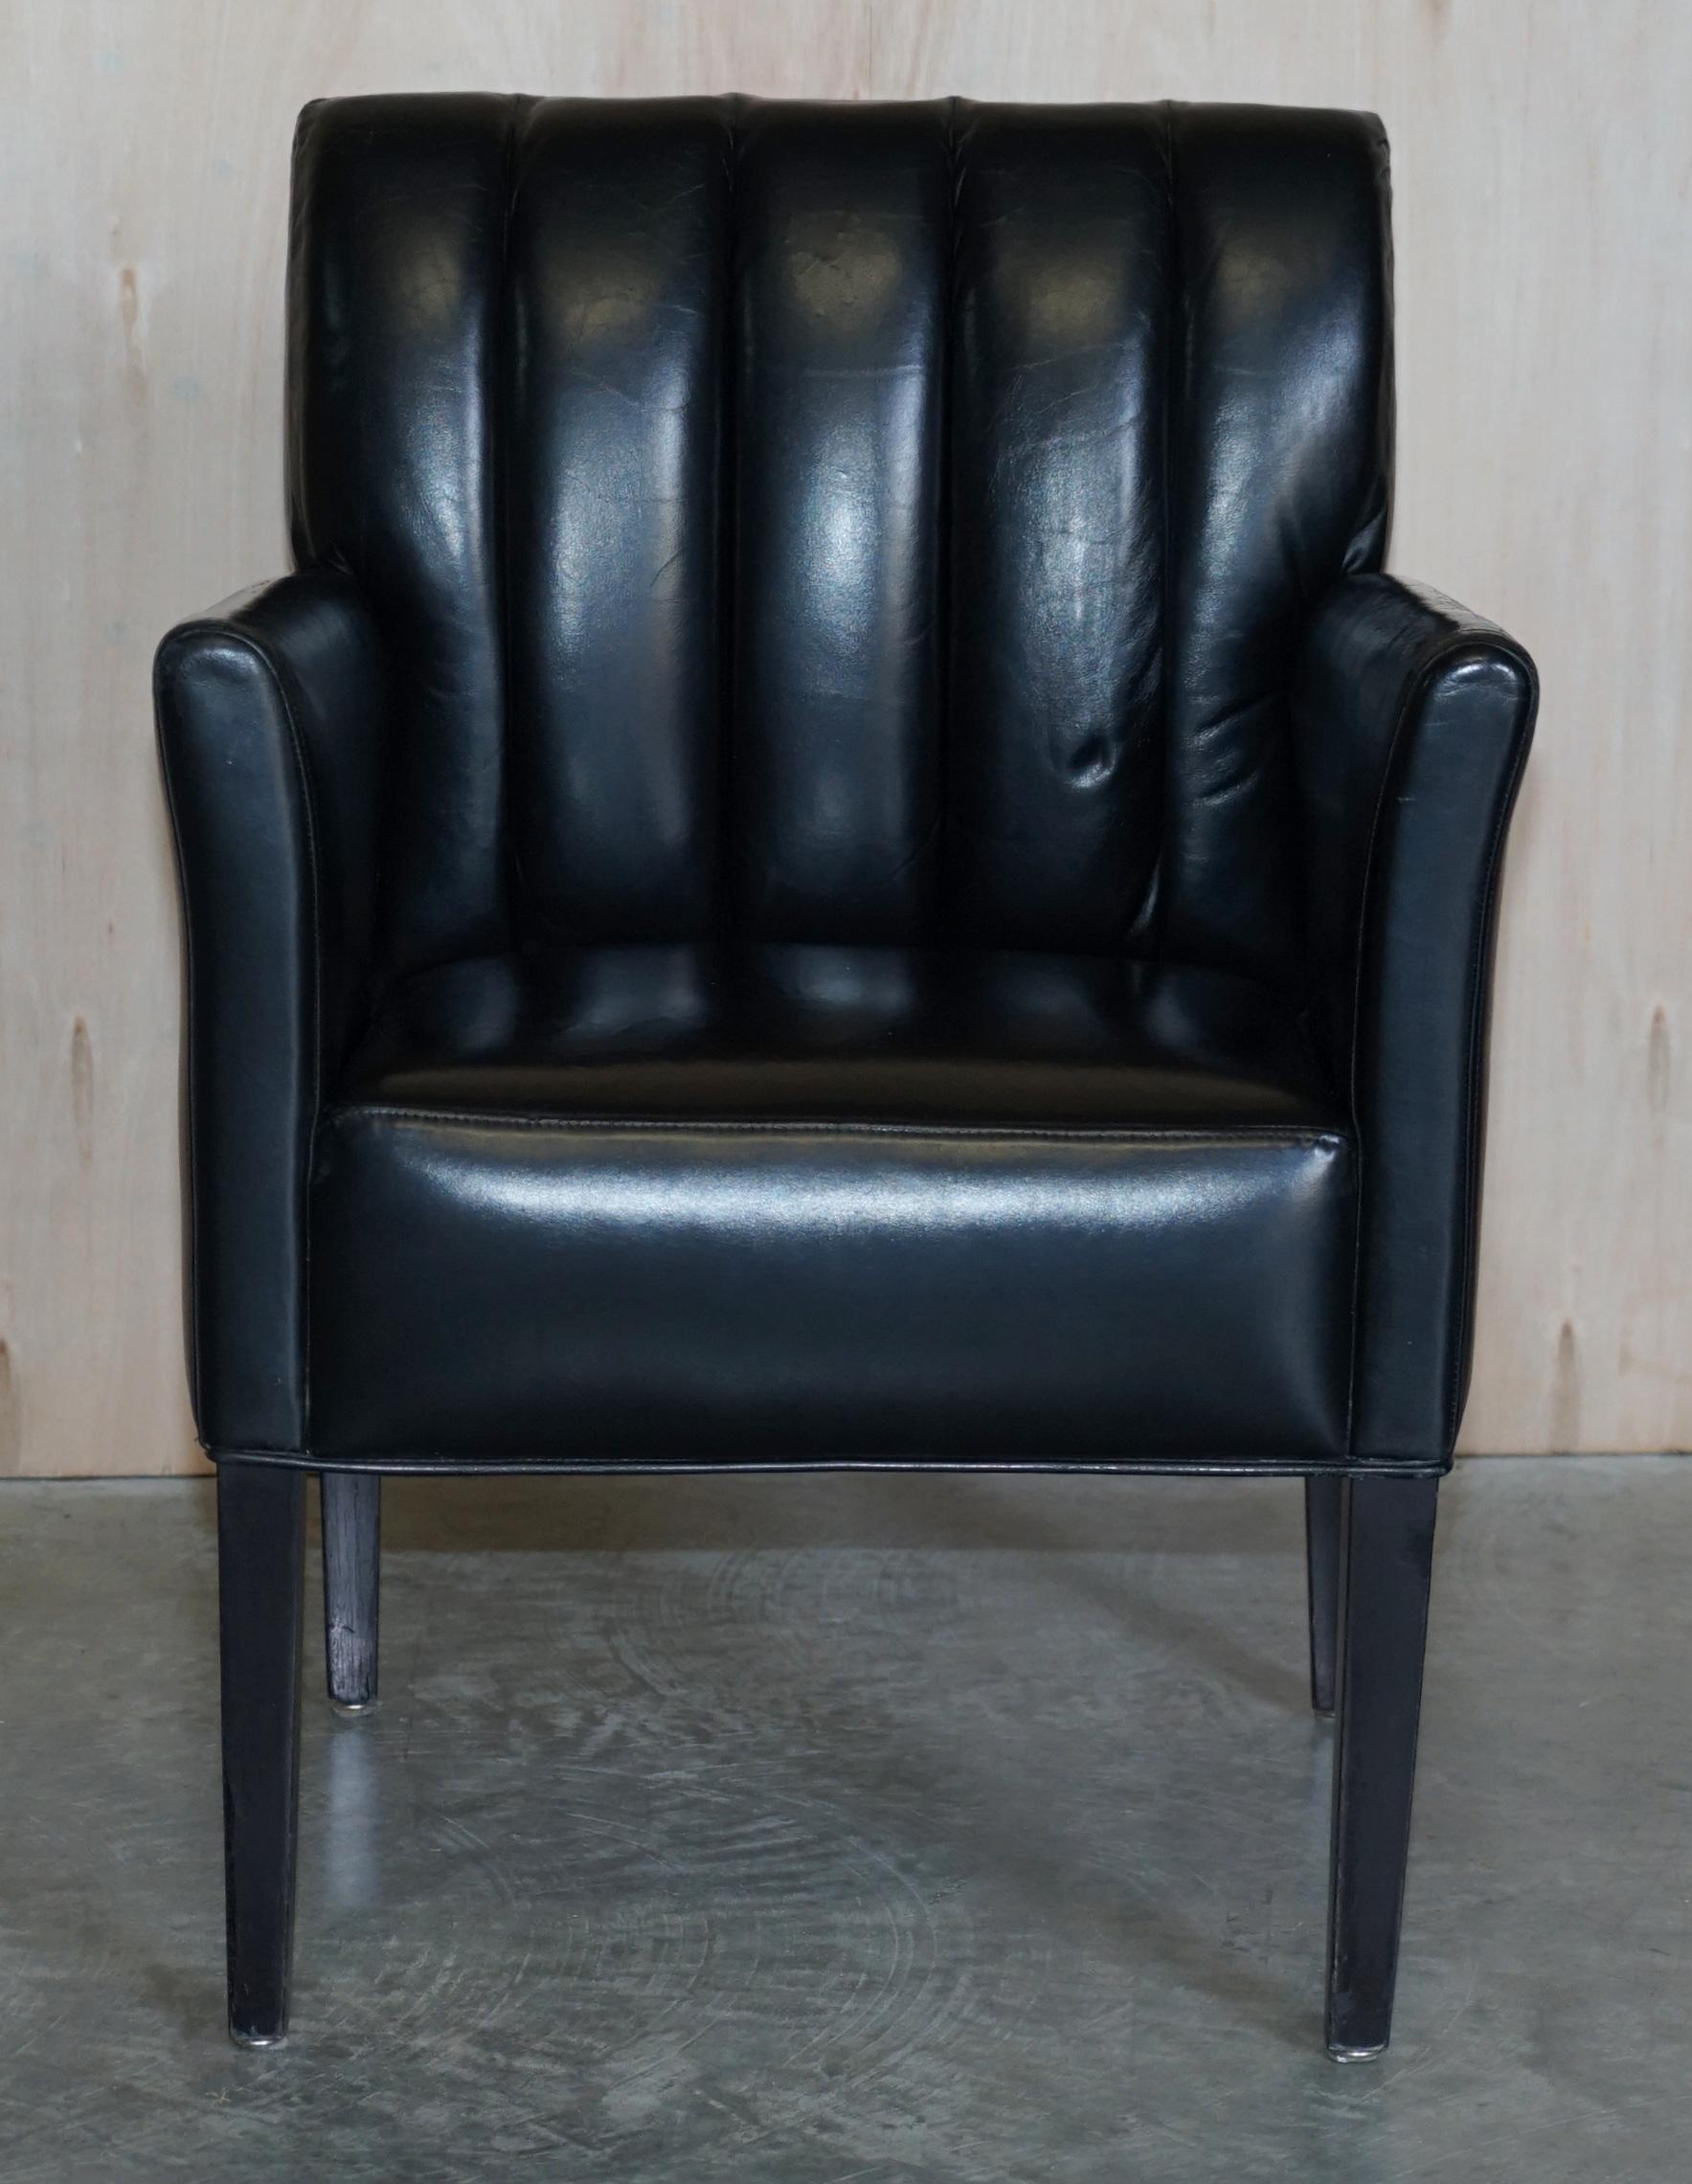 English Pair of Restored Art Deco Mid-Century Modern Style Fluted Back Leather Armchair For Sale